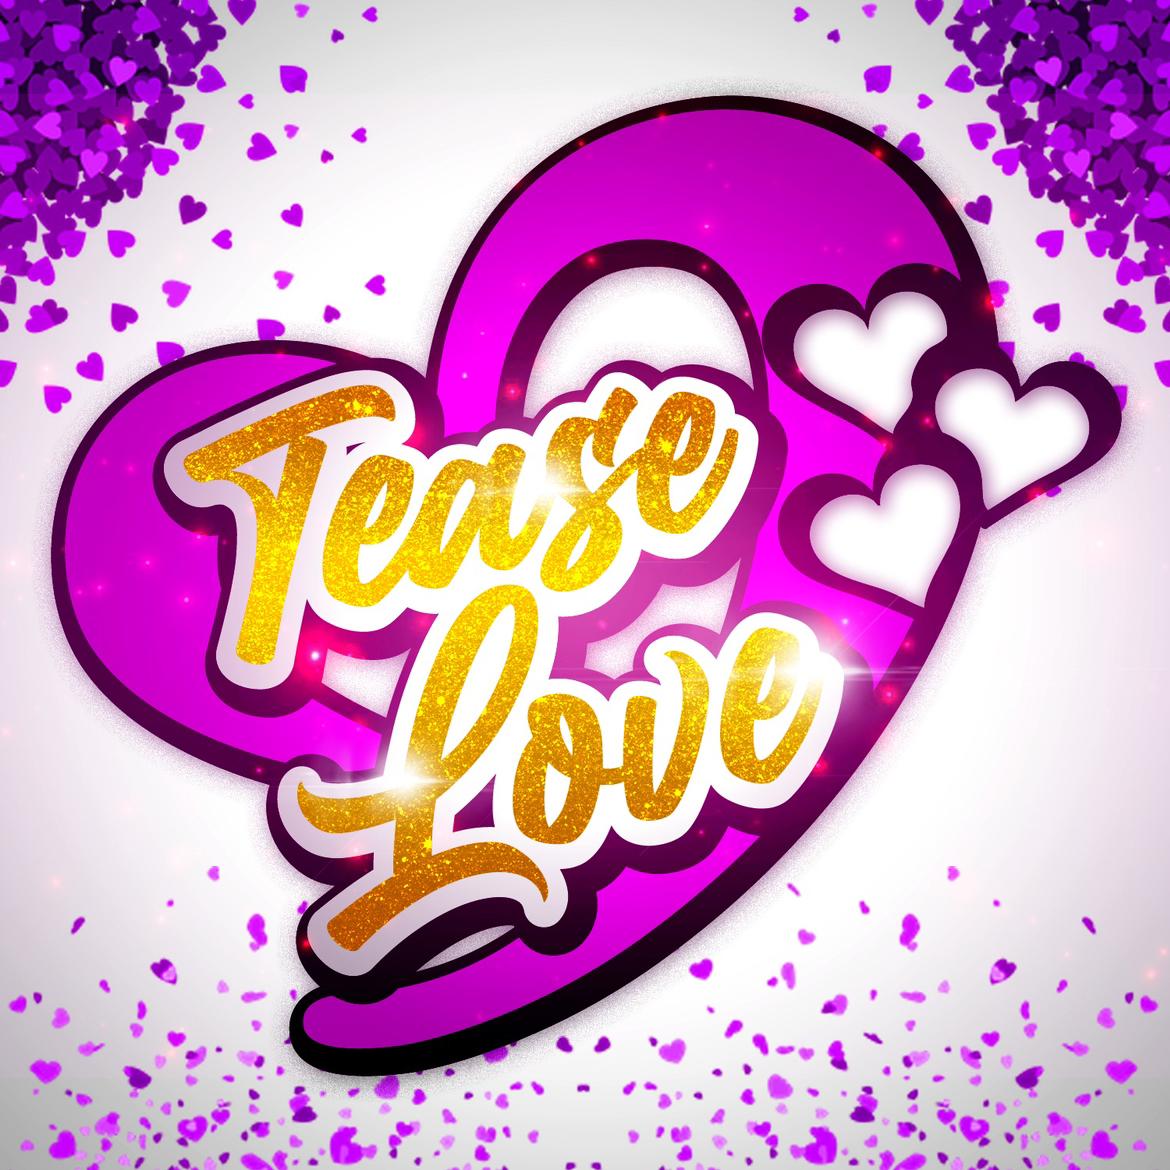 Tease_Love's images